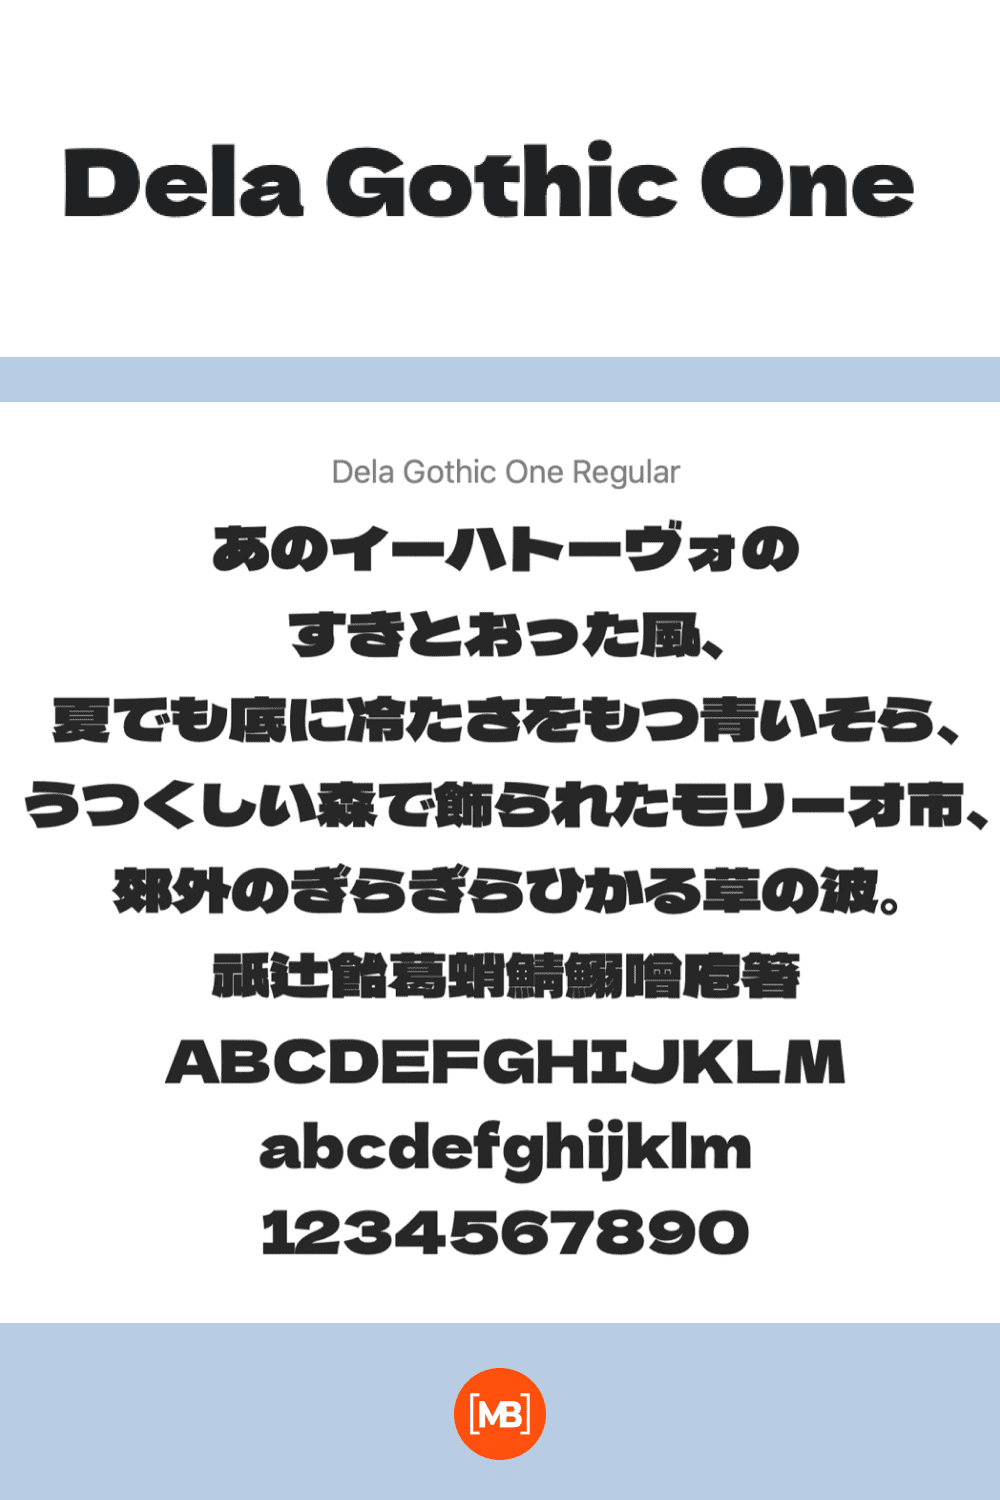 A creative font that speaks to Asian languages.